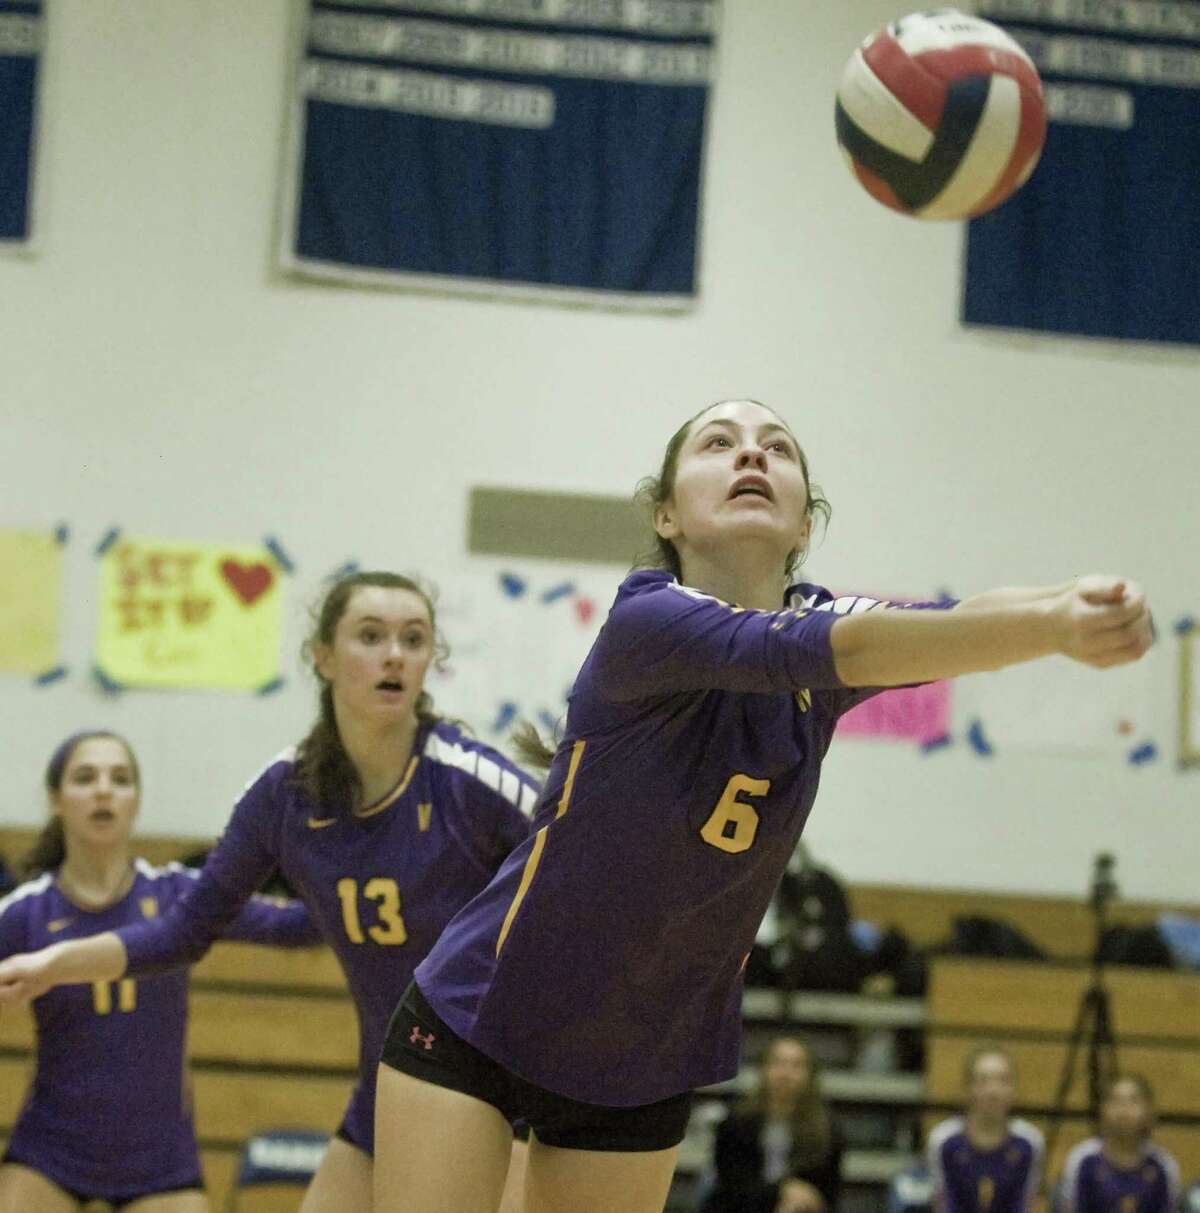 Westhill High School's Caroline Boyd returns the ball in a game against Darien High School, played at Darien. Monday, Oct. 22, 2018